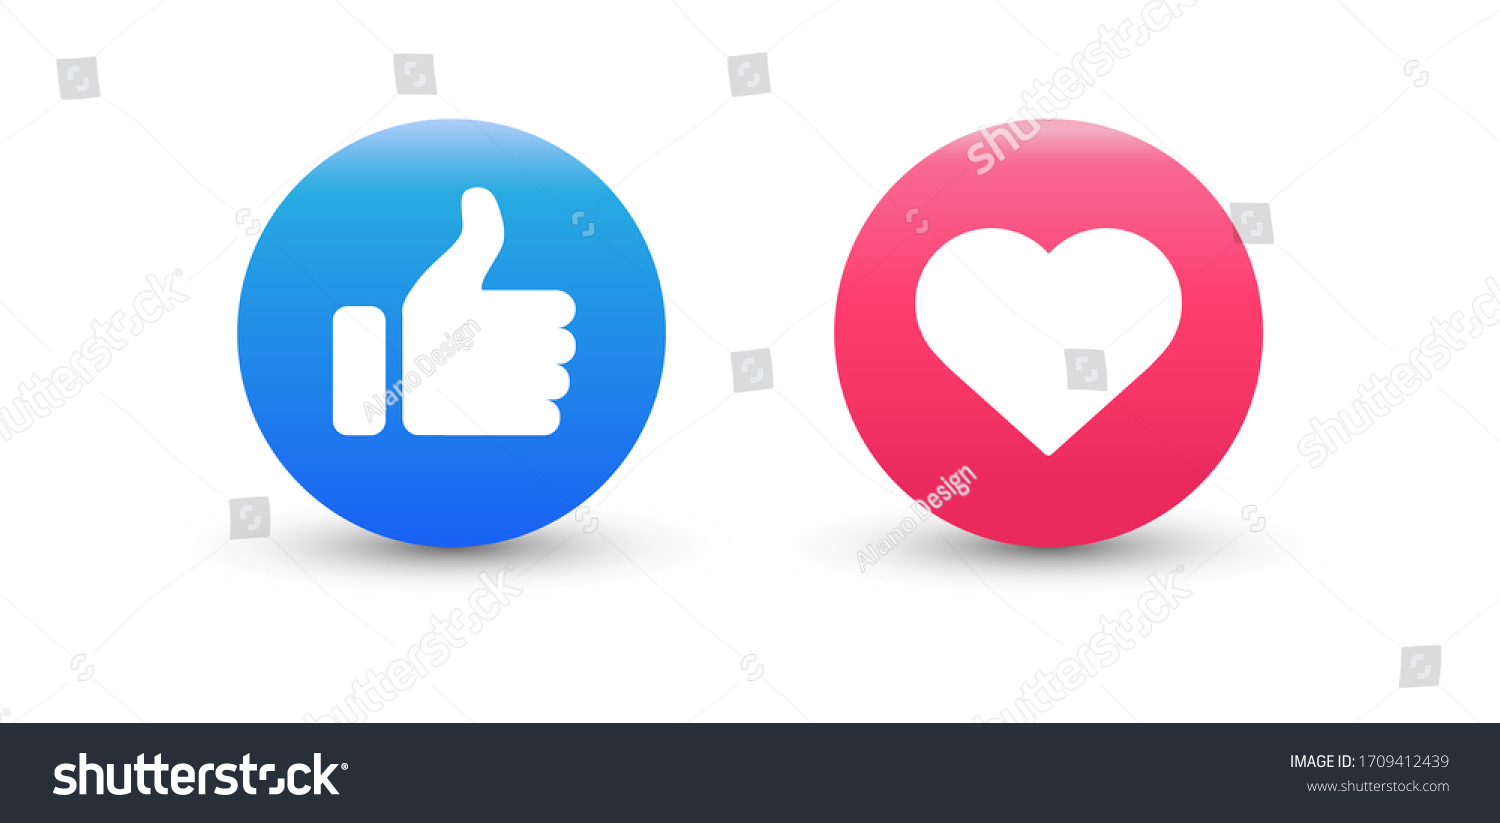 SVG of Thumb up and heart icon on white background. Vector illustration. svg